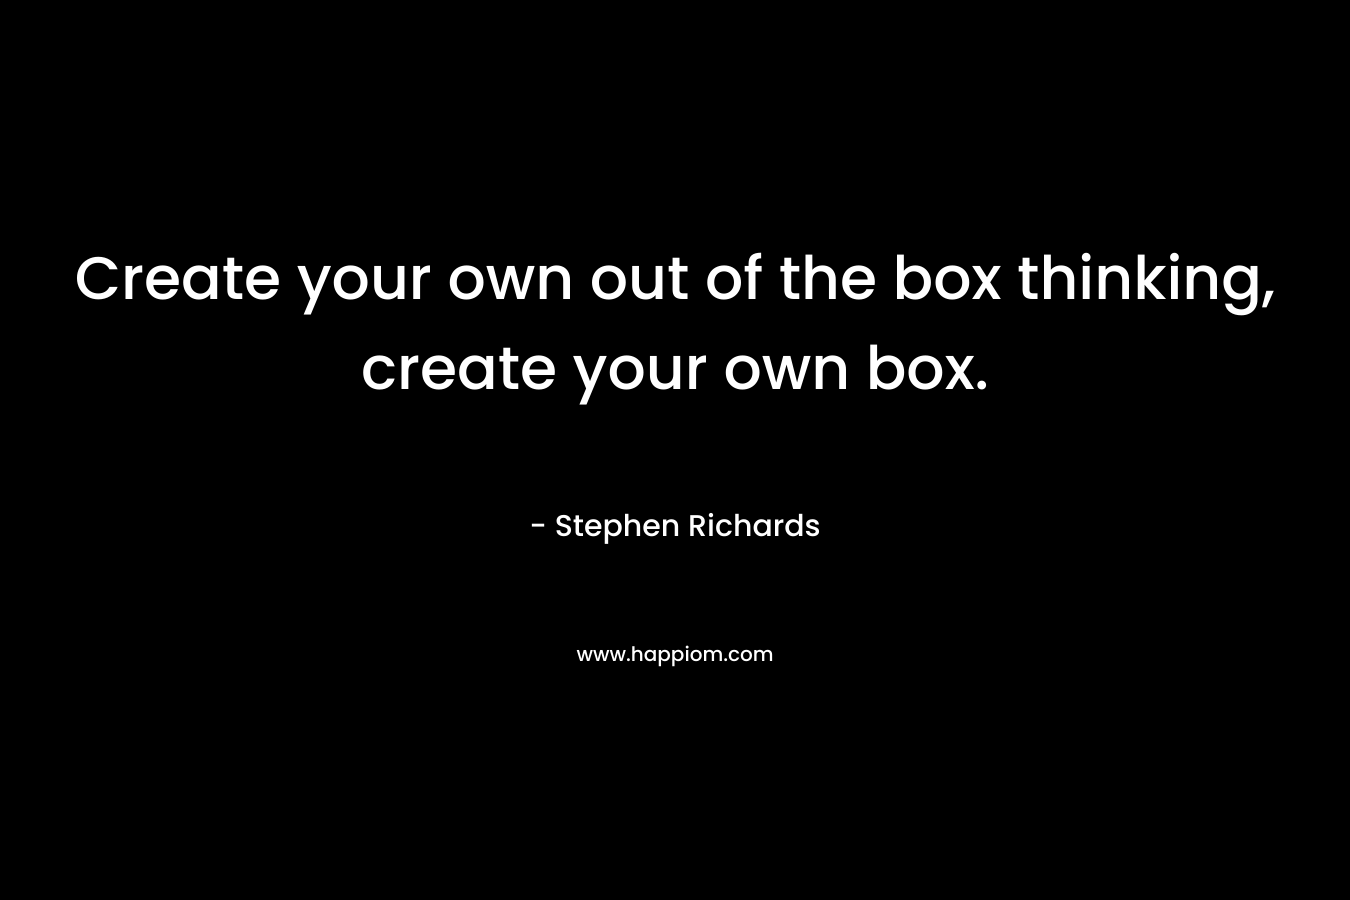 Create your own out of the box thinking, create your own box.